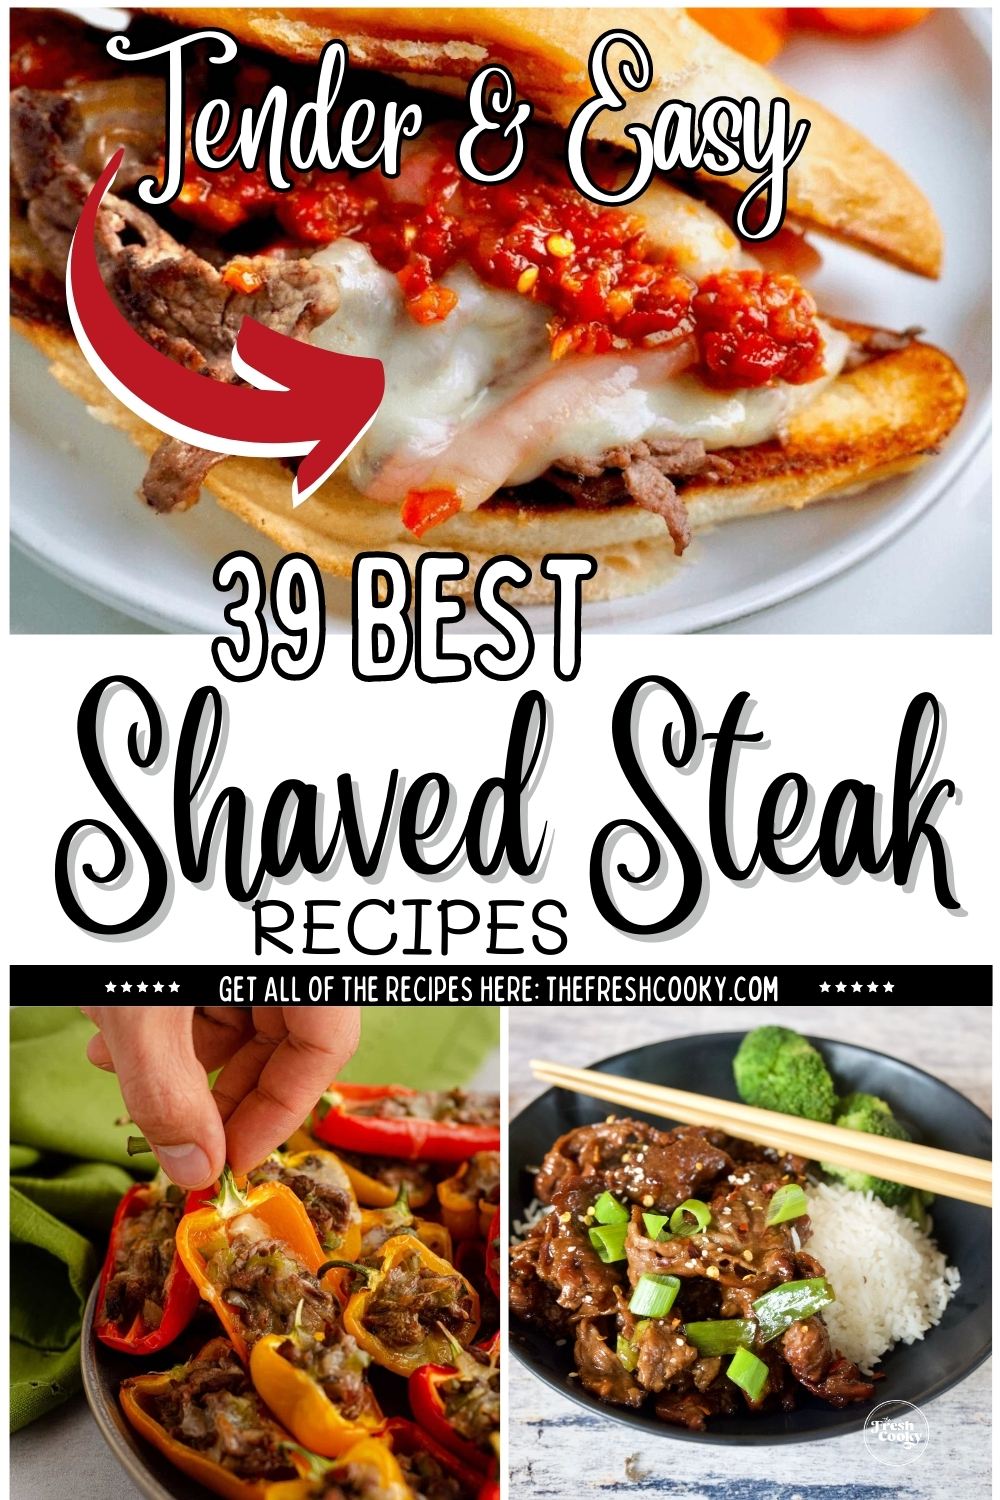 39 of the best shaved steak recipes to try, to pin.